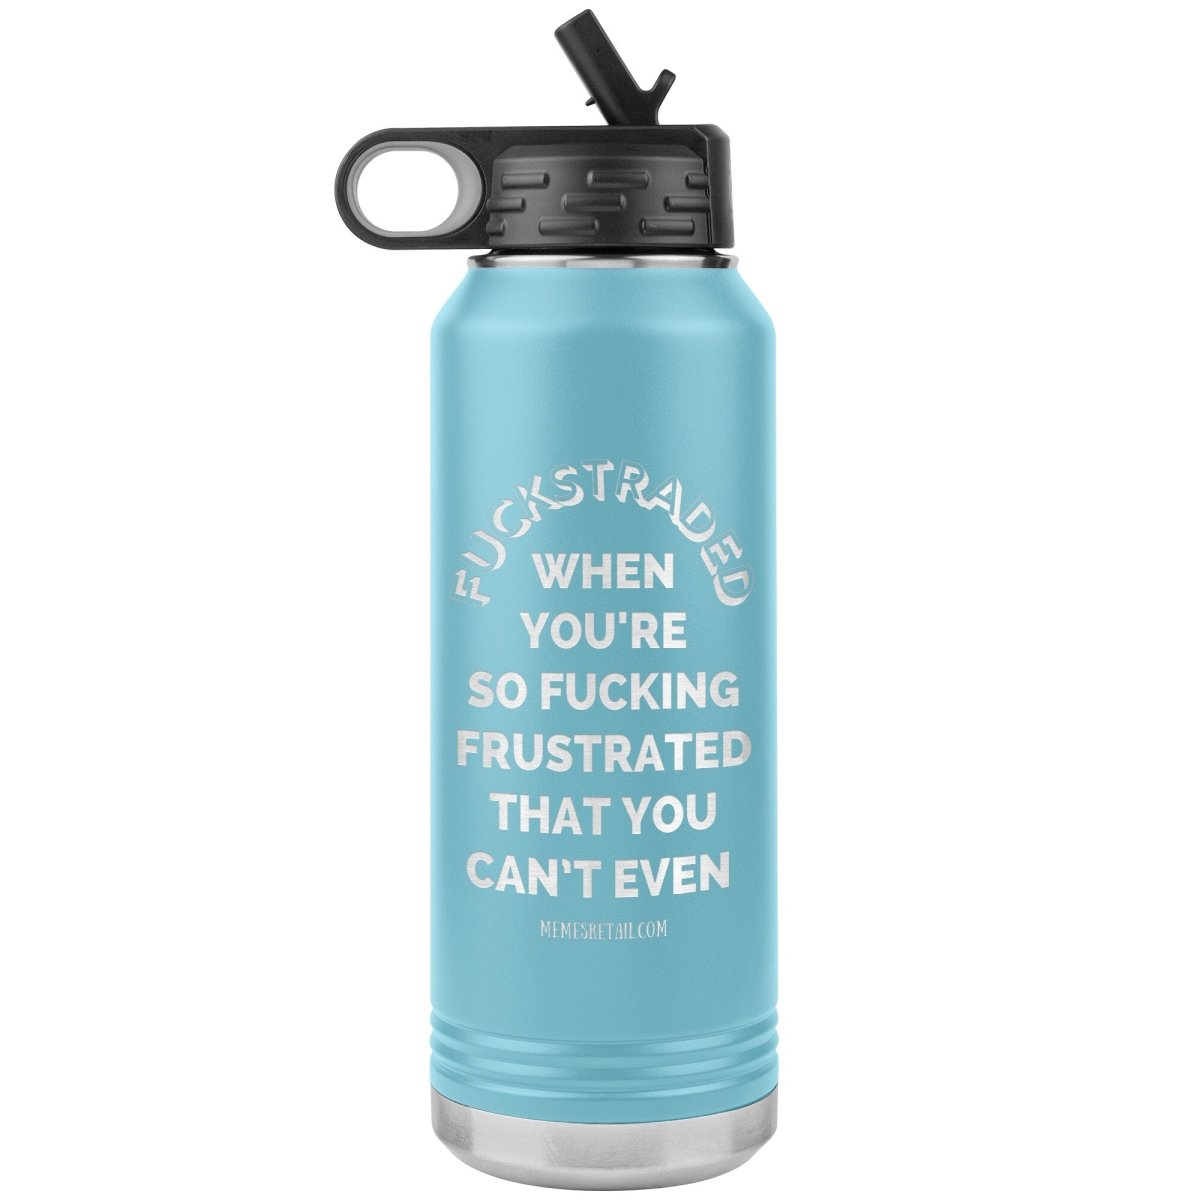 Fuckstraded, When You're So Fucking Frustrated That You Can’t Even - 32oz Water Tumblers, Light Blue - MemesRetail.com